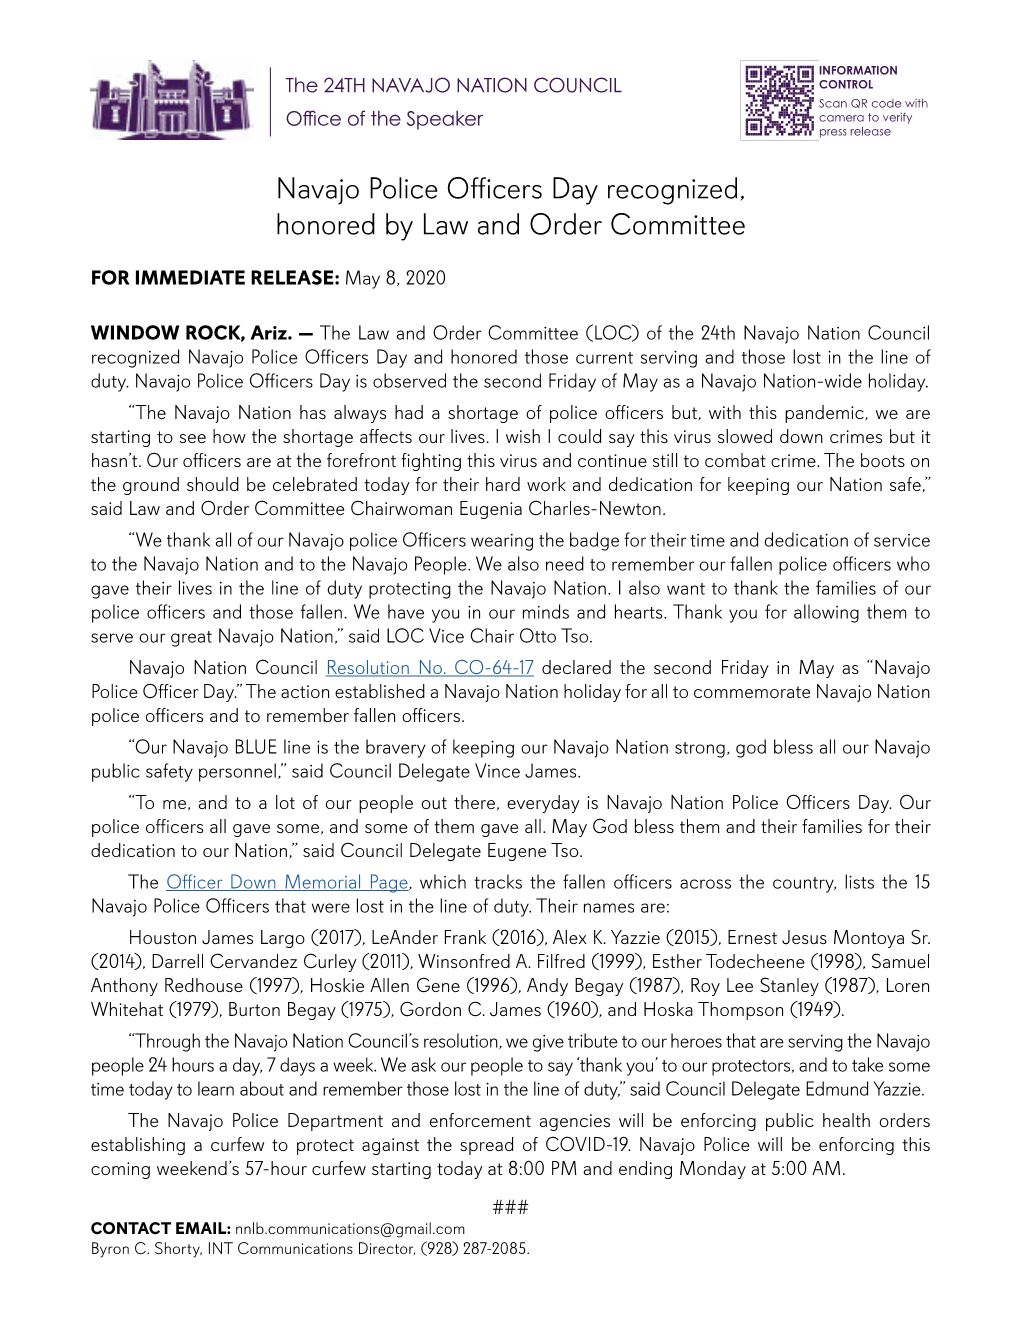 Navajo Police Officers Day Recognized, Honored by Law and Order Committee